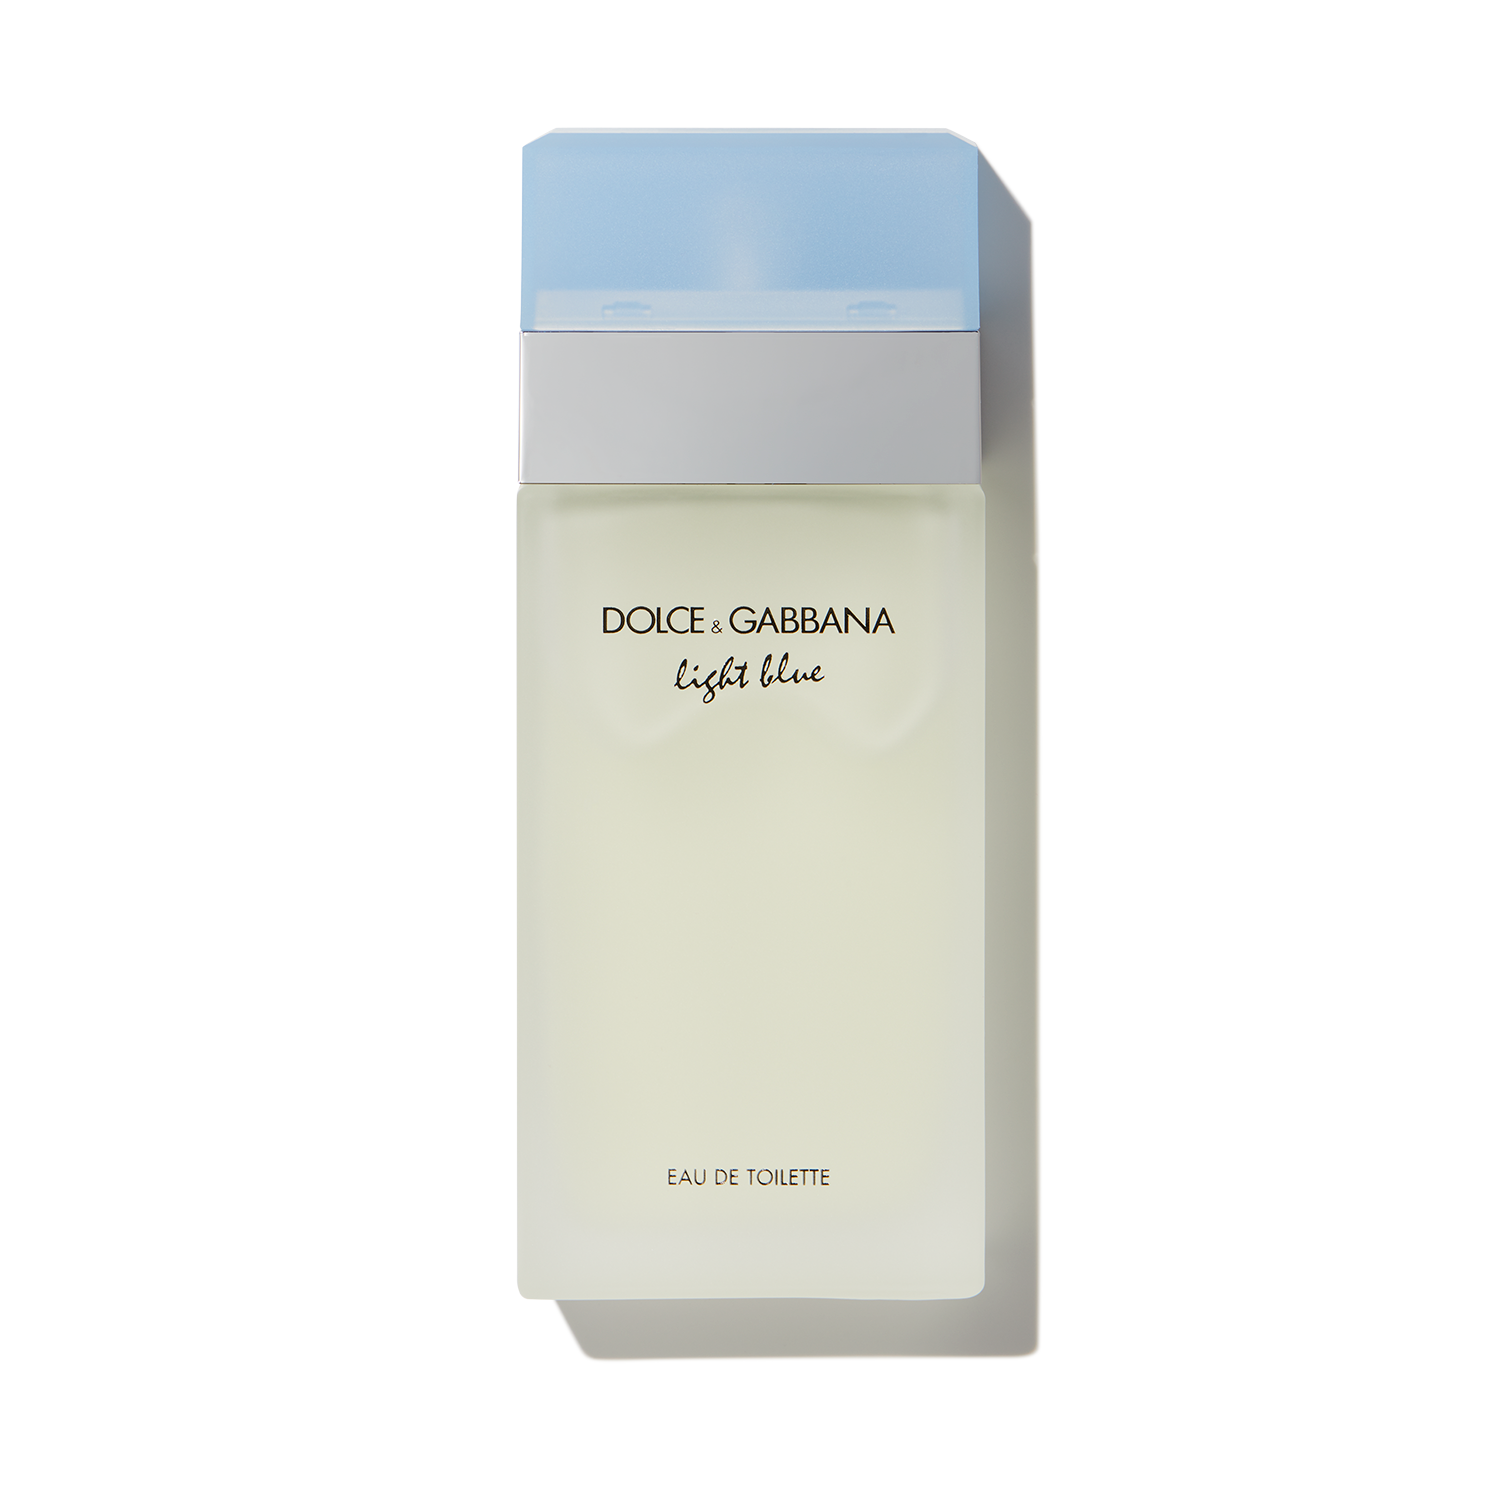 Buy Dolce And Gabbana Light Blue perfume at Scentbird